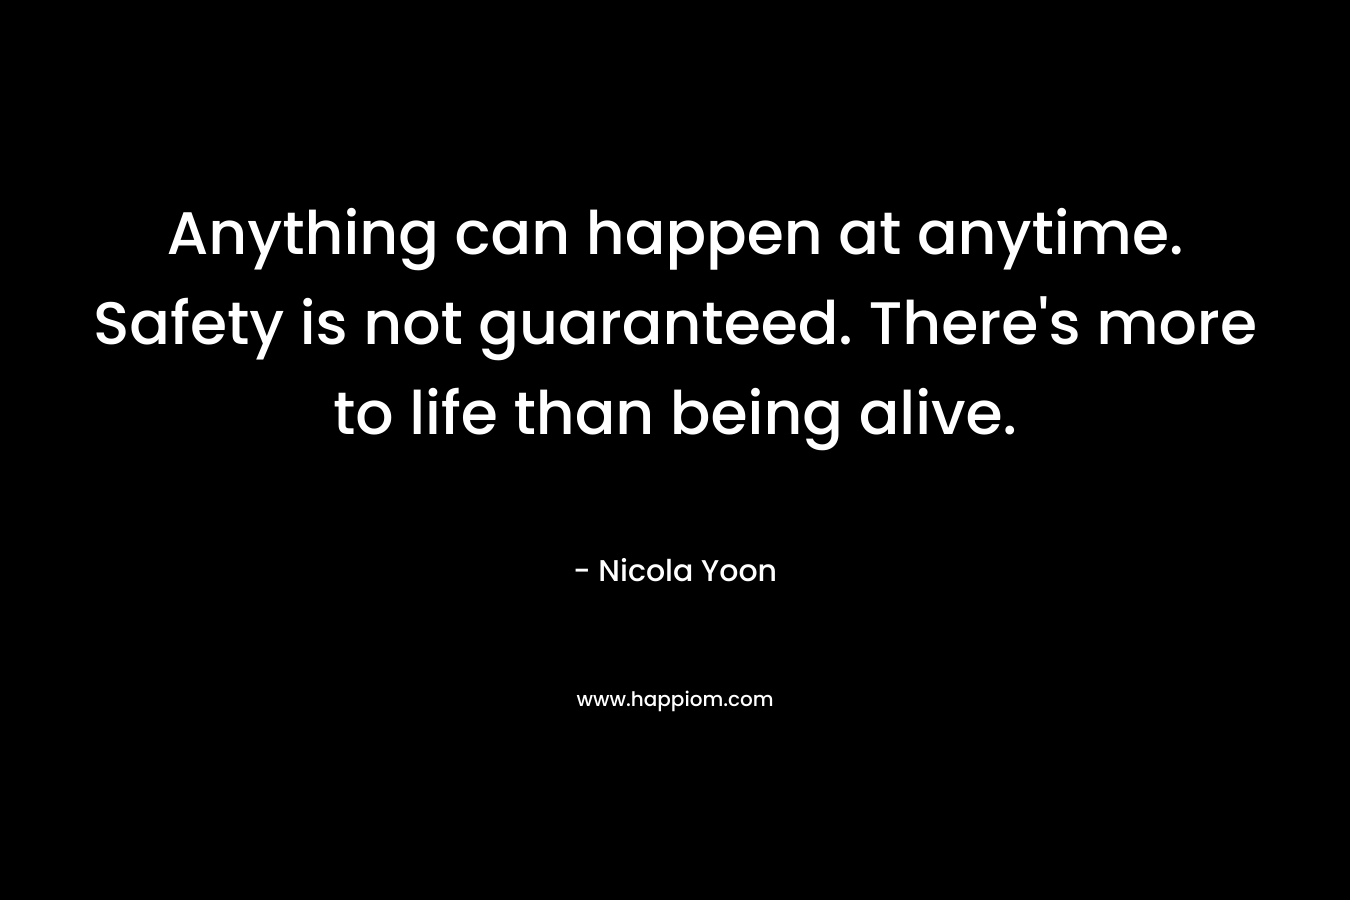 Anything can happen at anytime. Safety is not guaranteed. There’s more to life than being alive. – Nicola Yoon